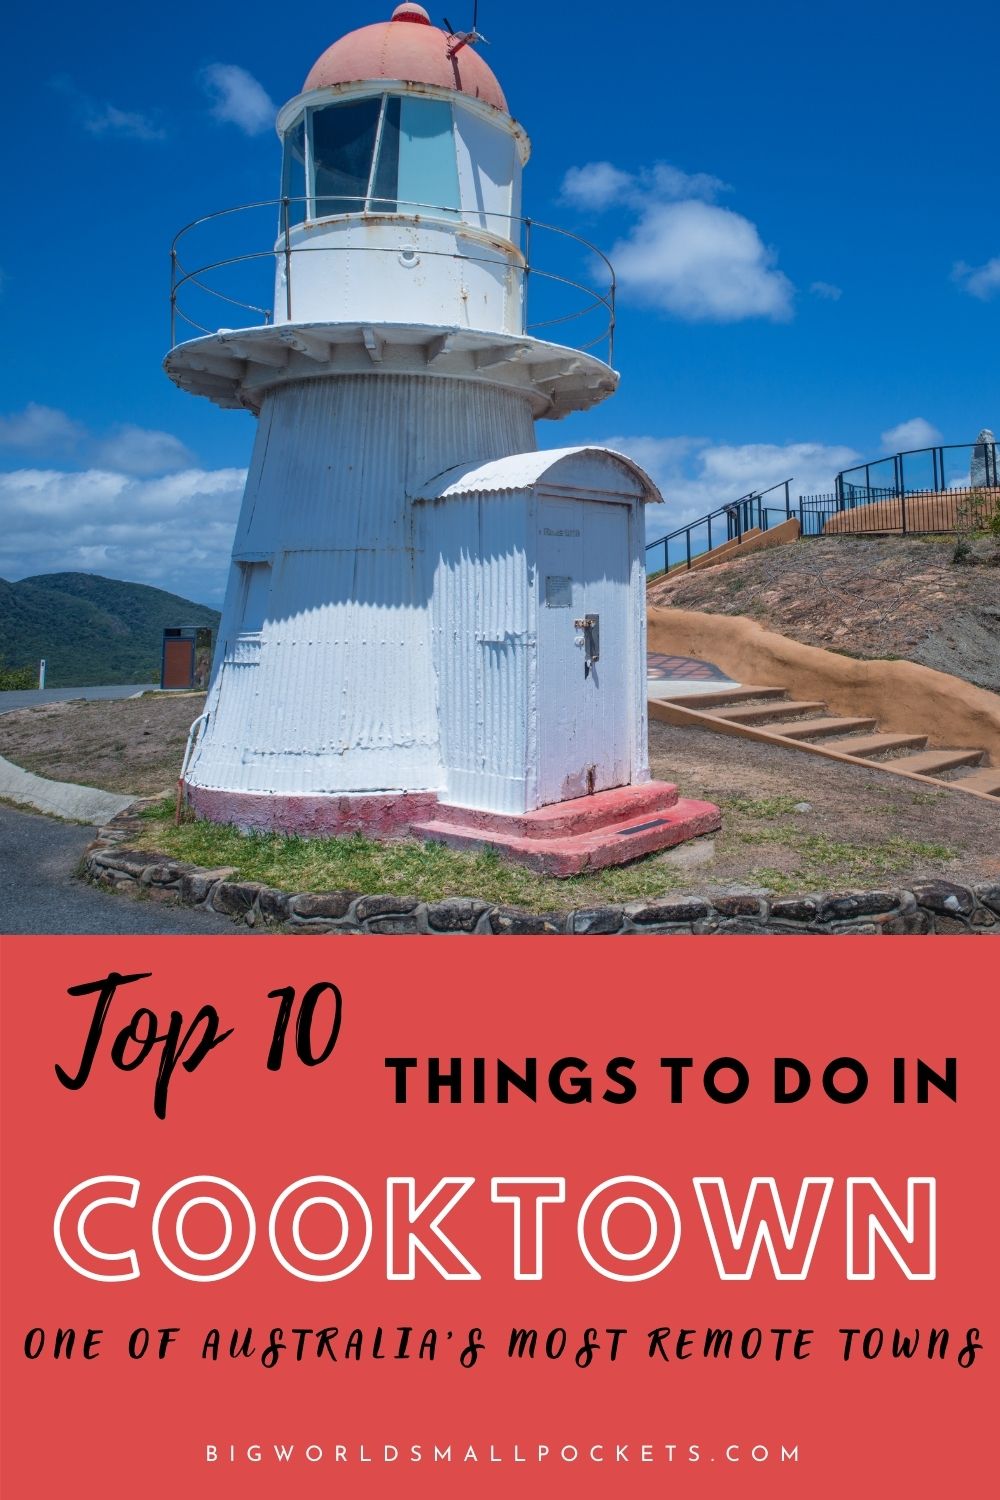 Top 10 Things to Do in Cooktown, Australia